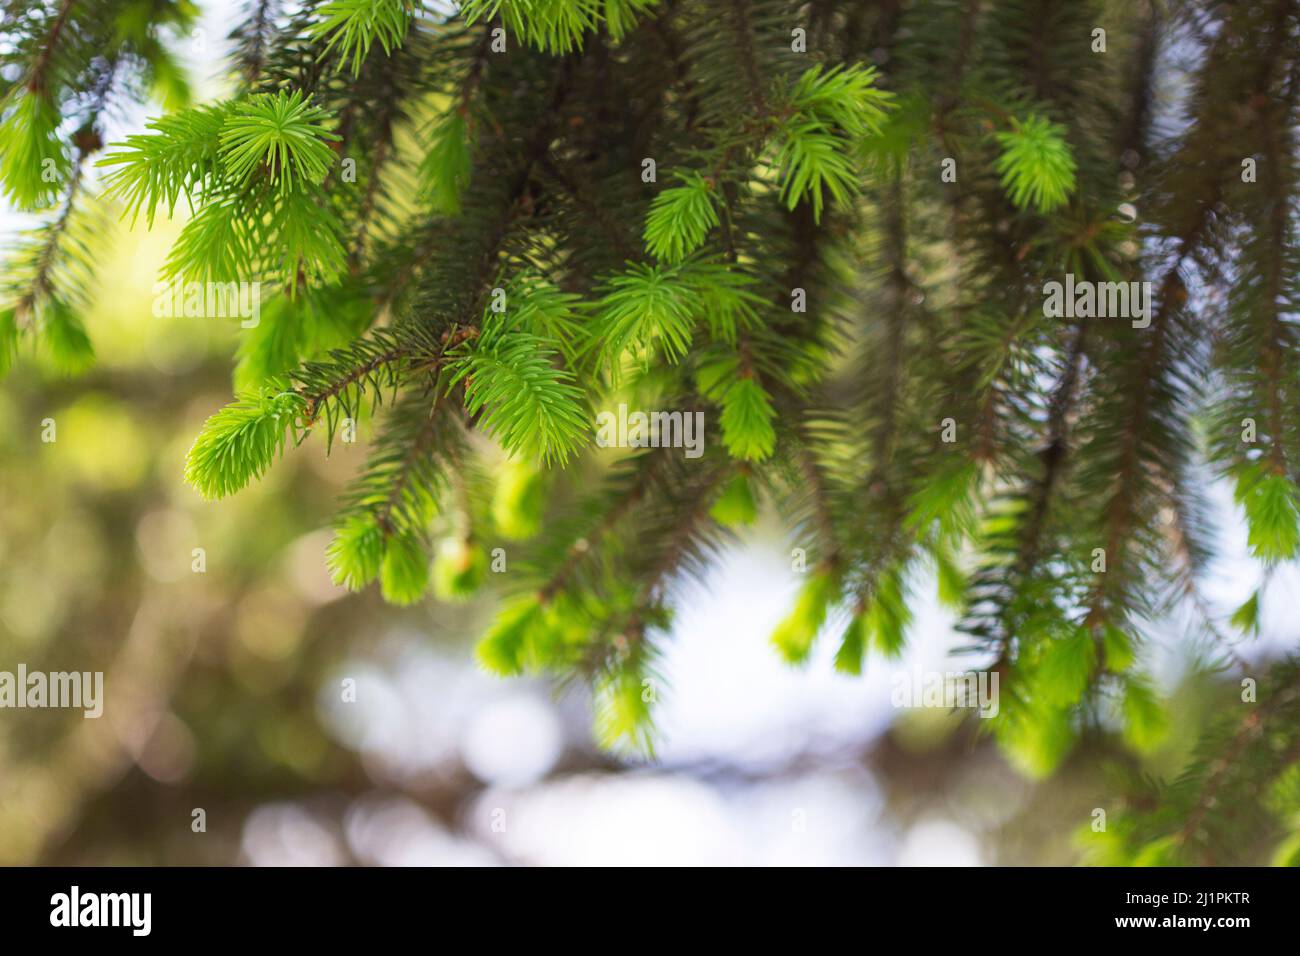 Spruce branches with young sprouts in the park. Ecological concept. Stock Photo